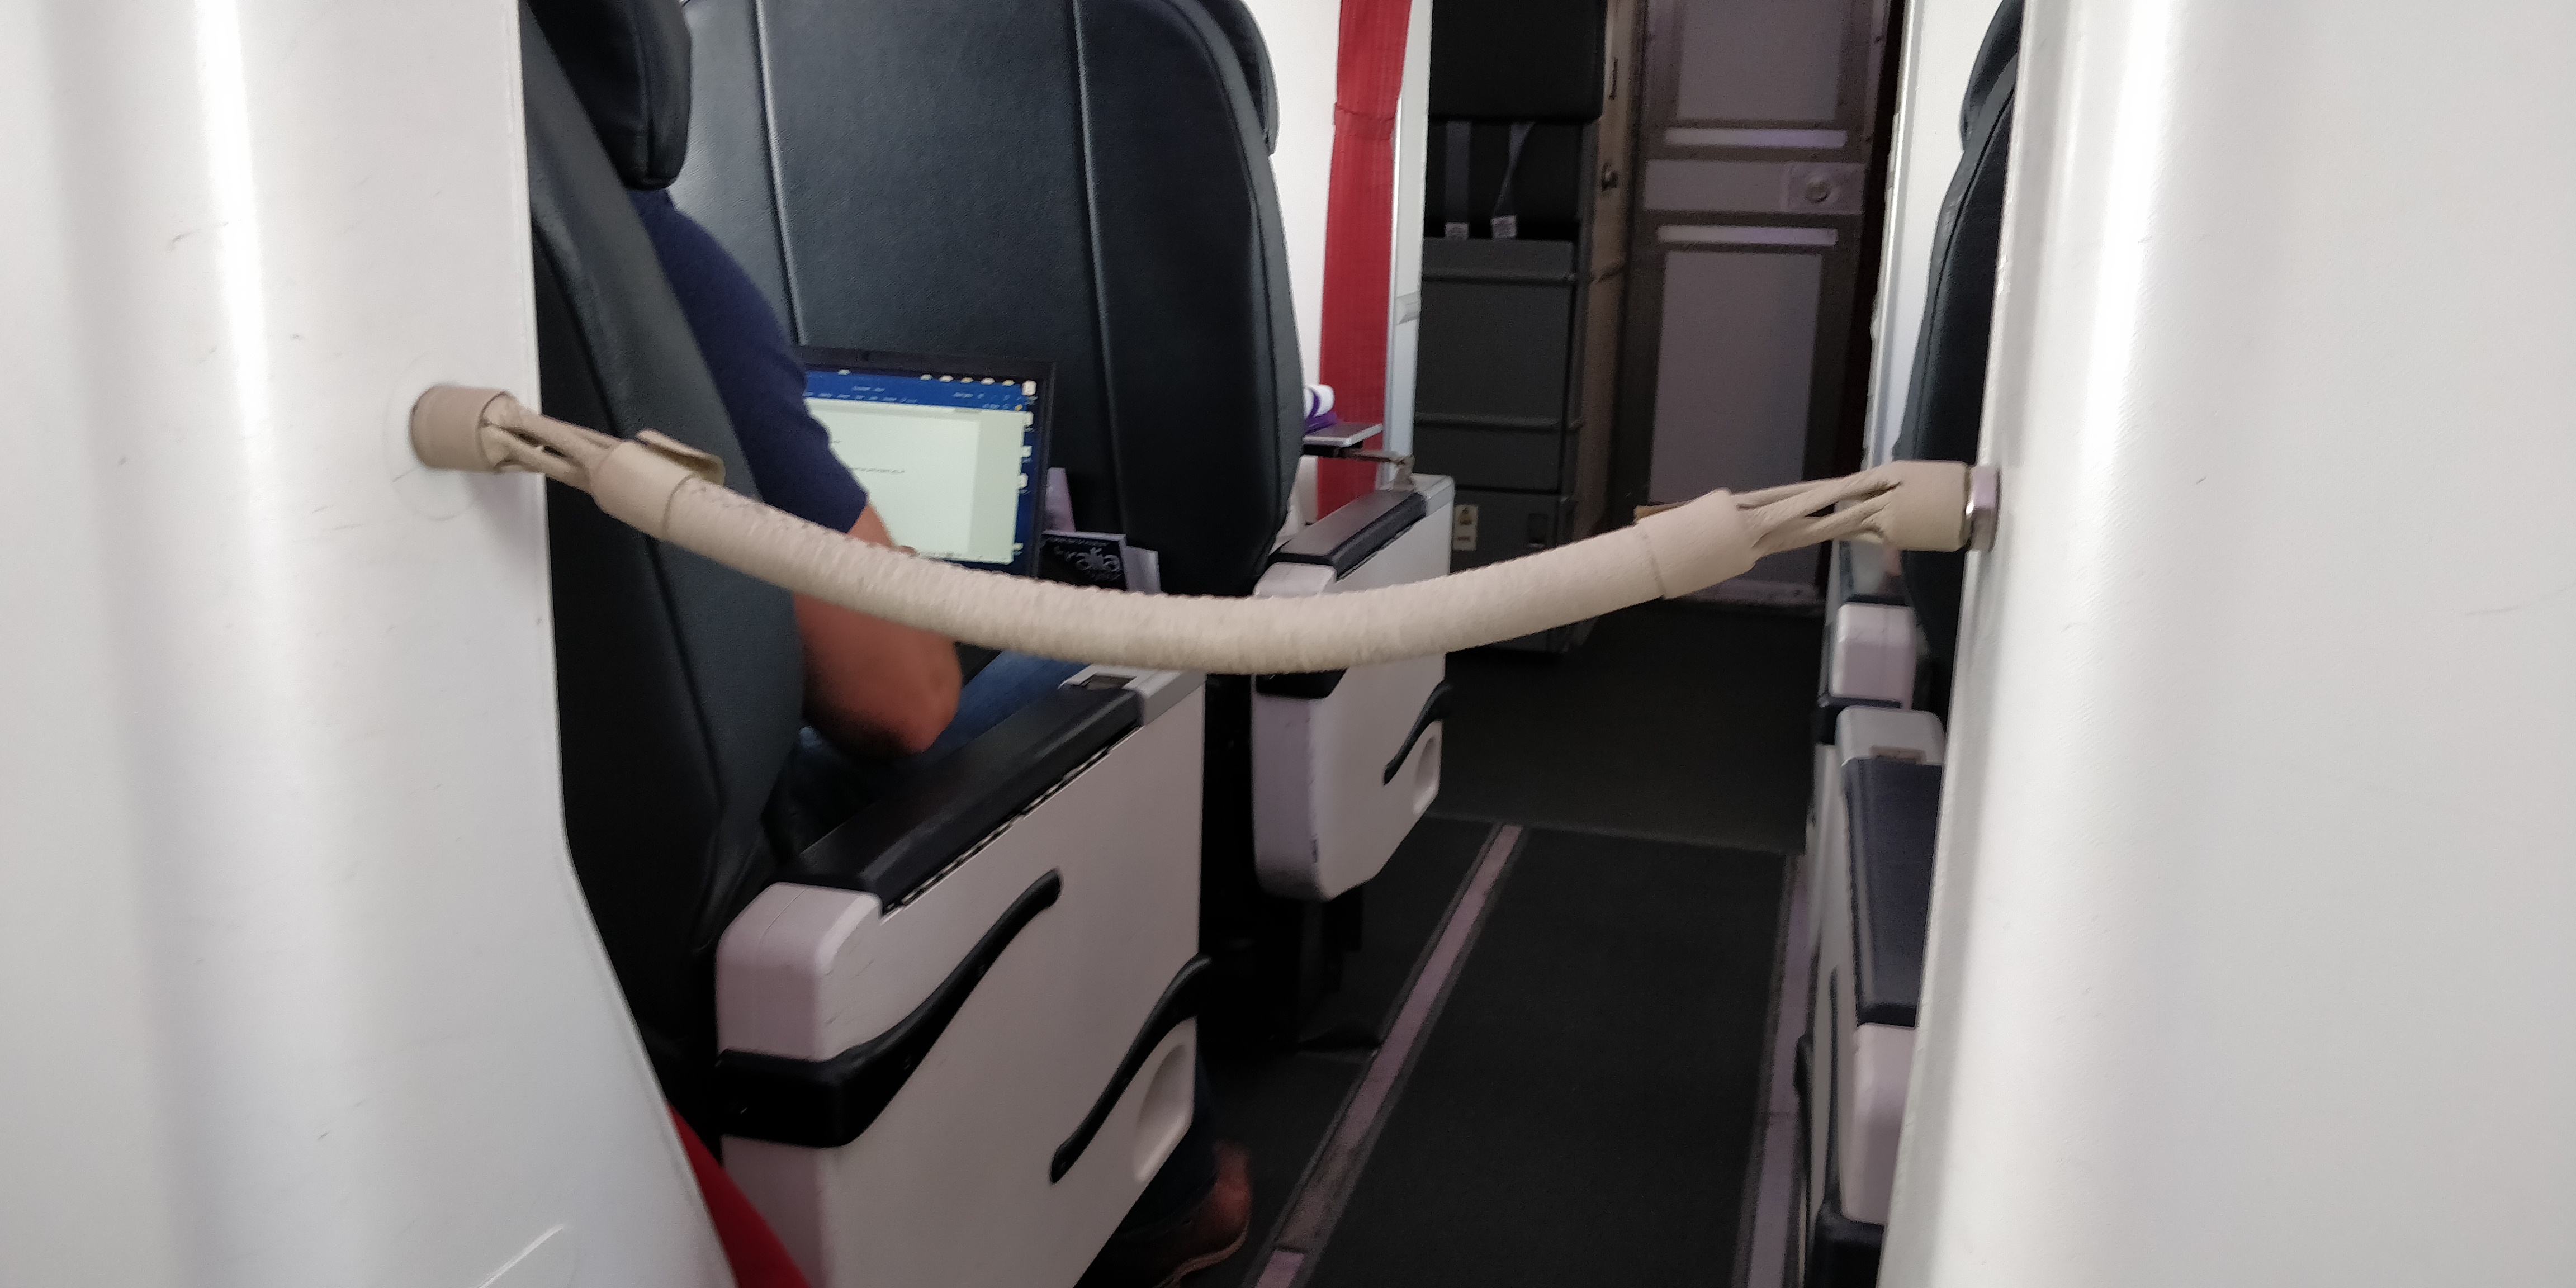 A PICTURE OF VIRGIN 737 BUSINESS CLASS ROPE SEPARATOR